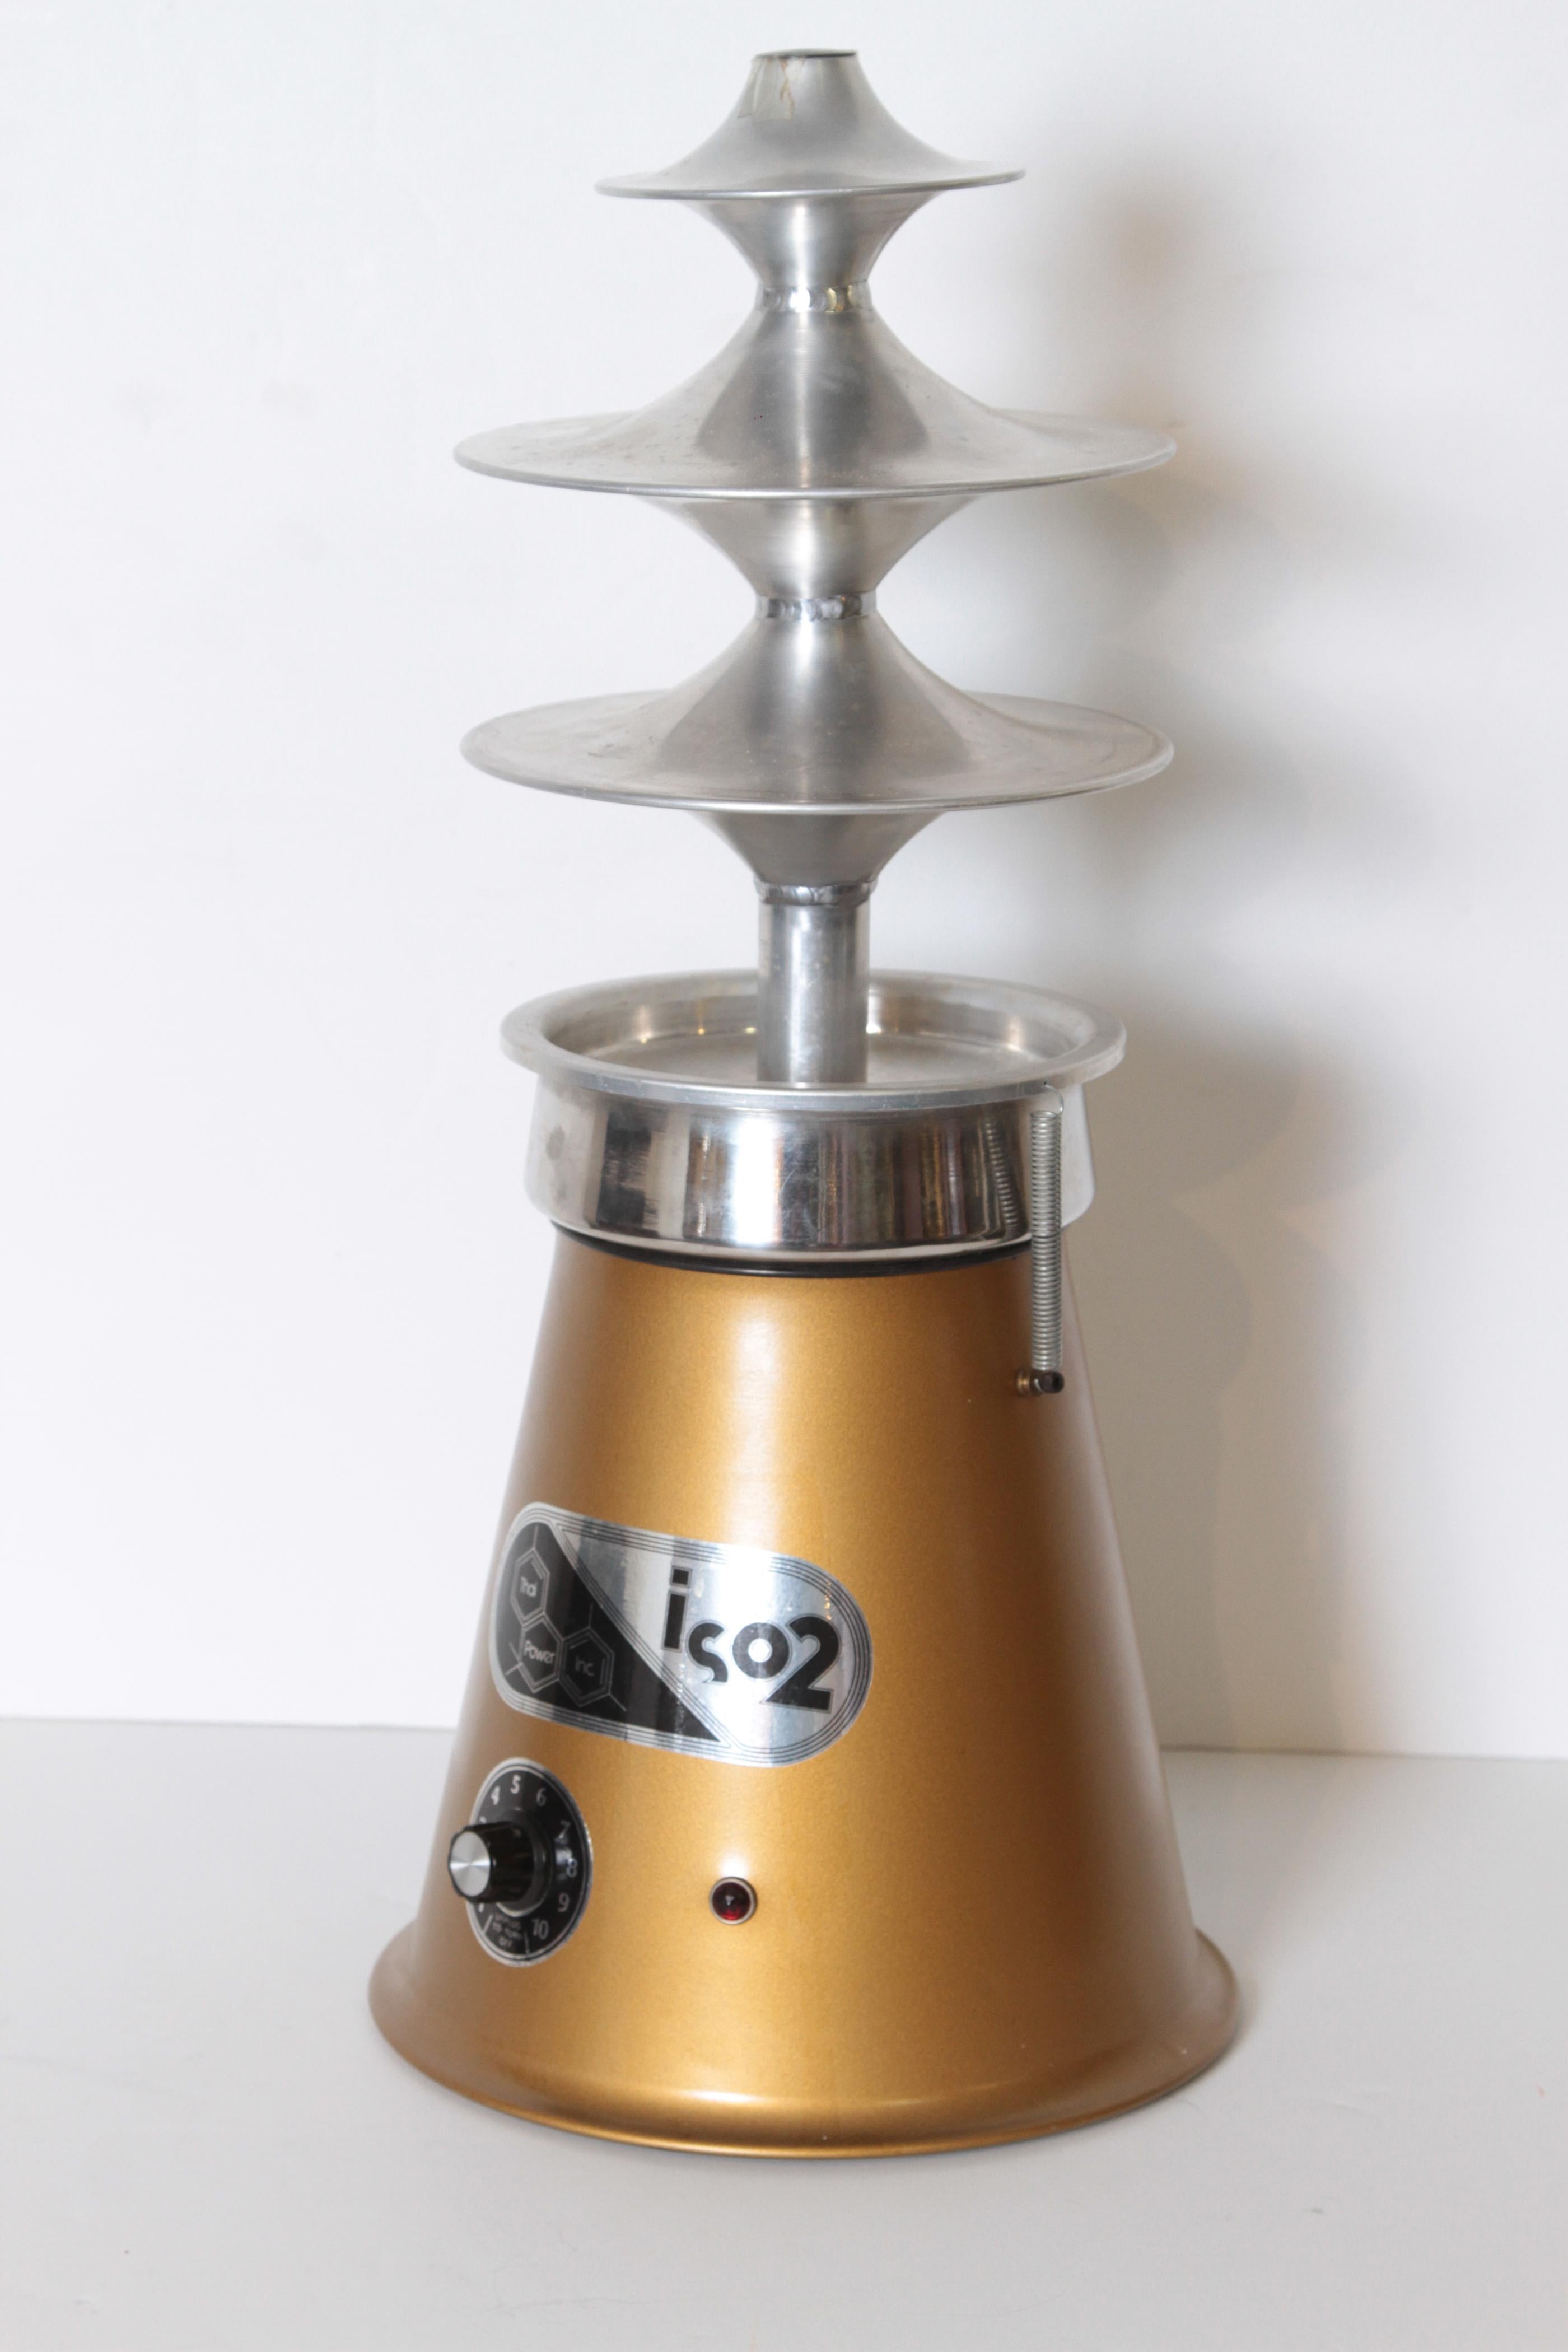 Machine Age original Thai Power ISO2 Isomerizer, essential oil extractor, 1975   Price Reduced

A mid-1970s iconic head-shop classic.
Retro art deco, midcentury design. Midcentury. Mid Century.
Here's a complete pristine example; with unopened bags